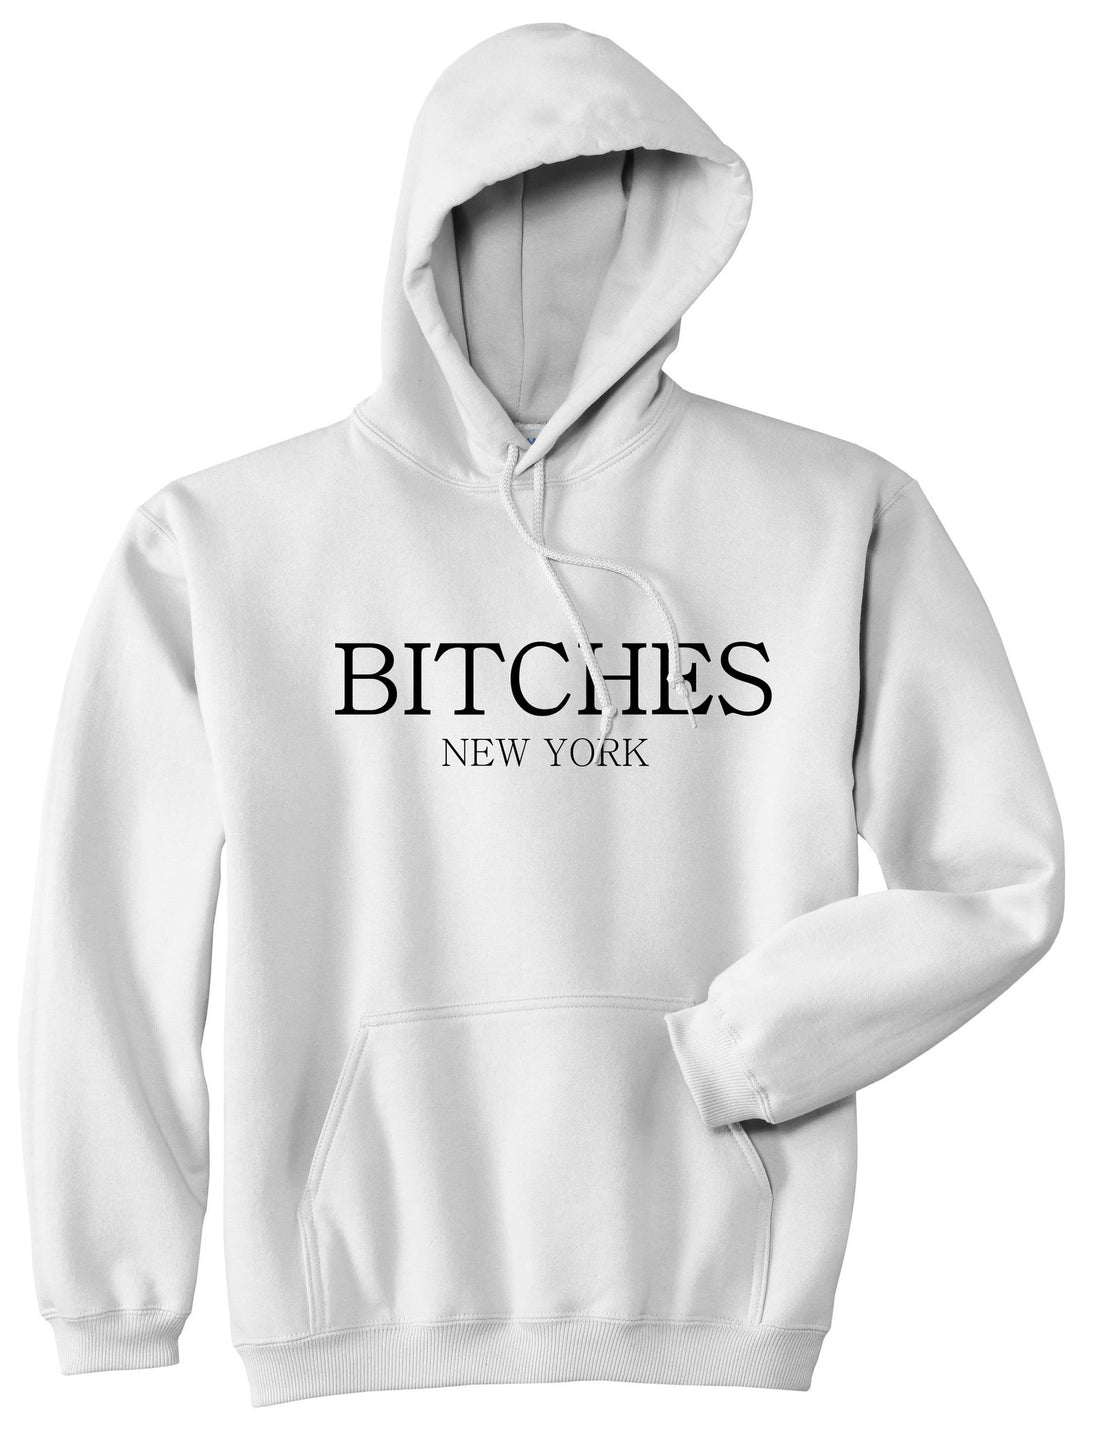  Bitches New York Pullover Hoodie Hoody in White by Kings Of NY